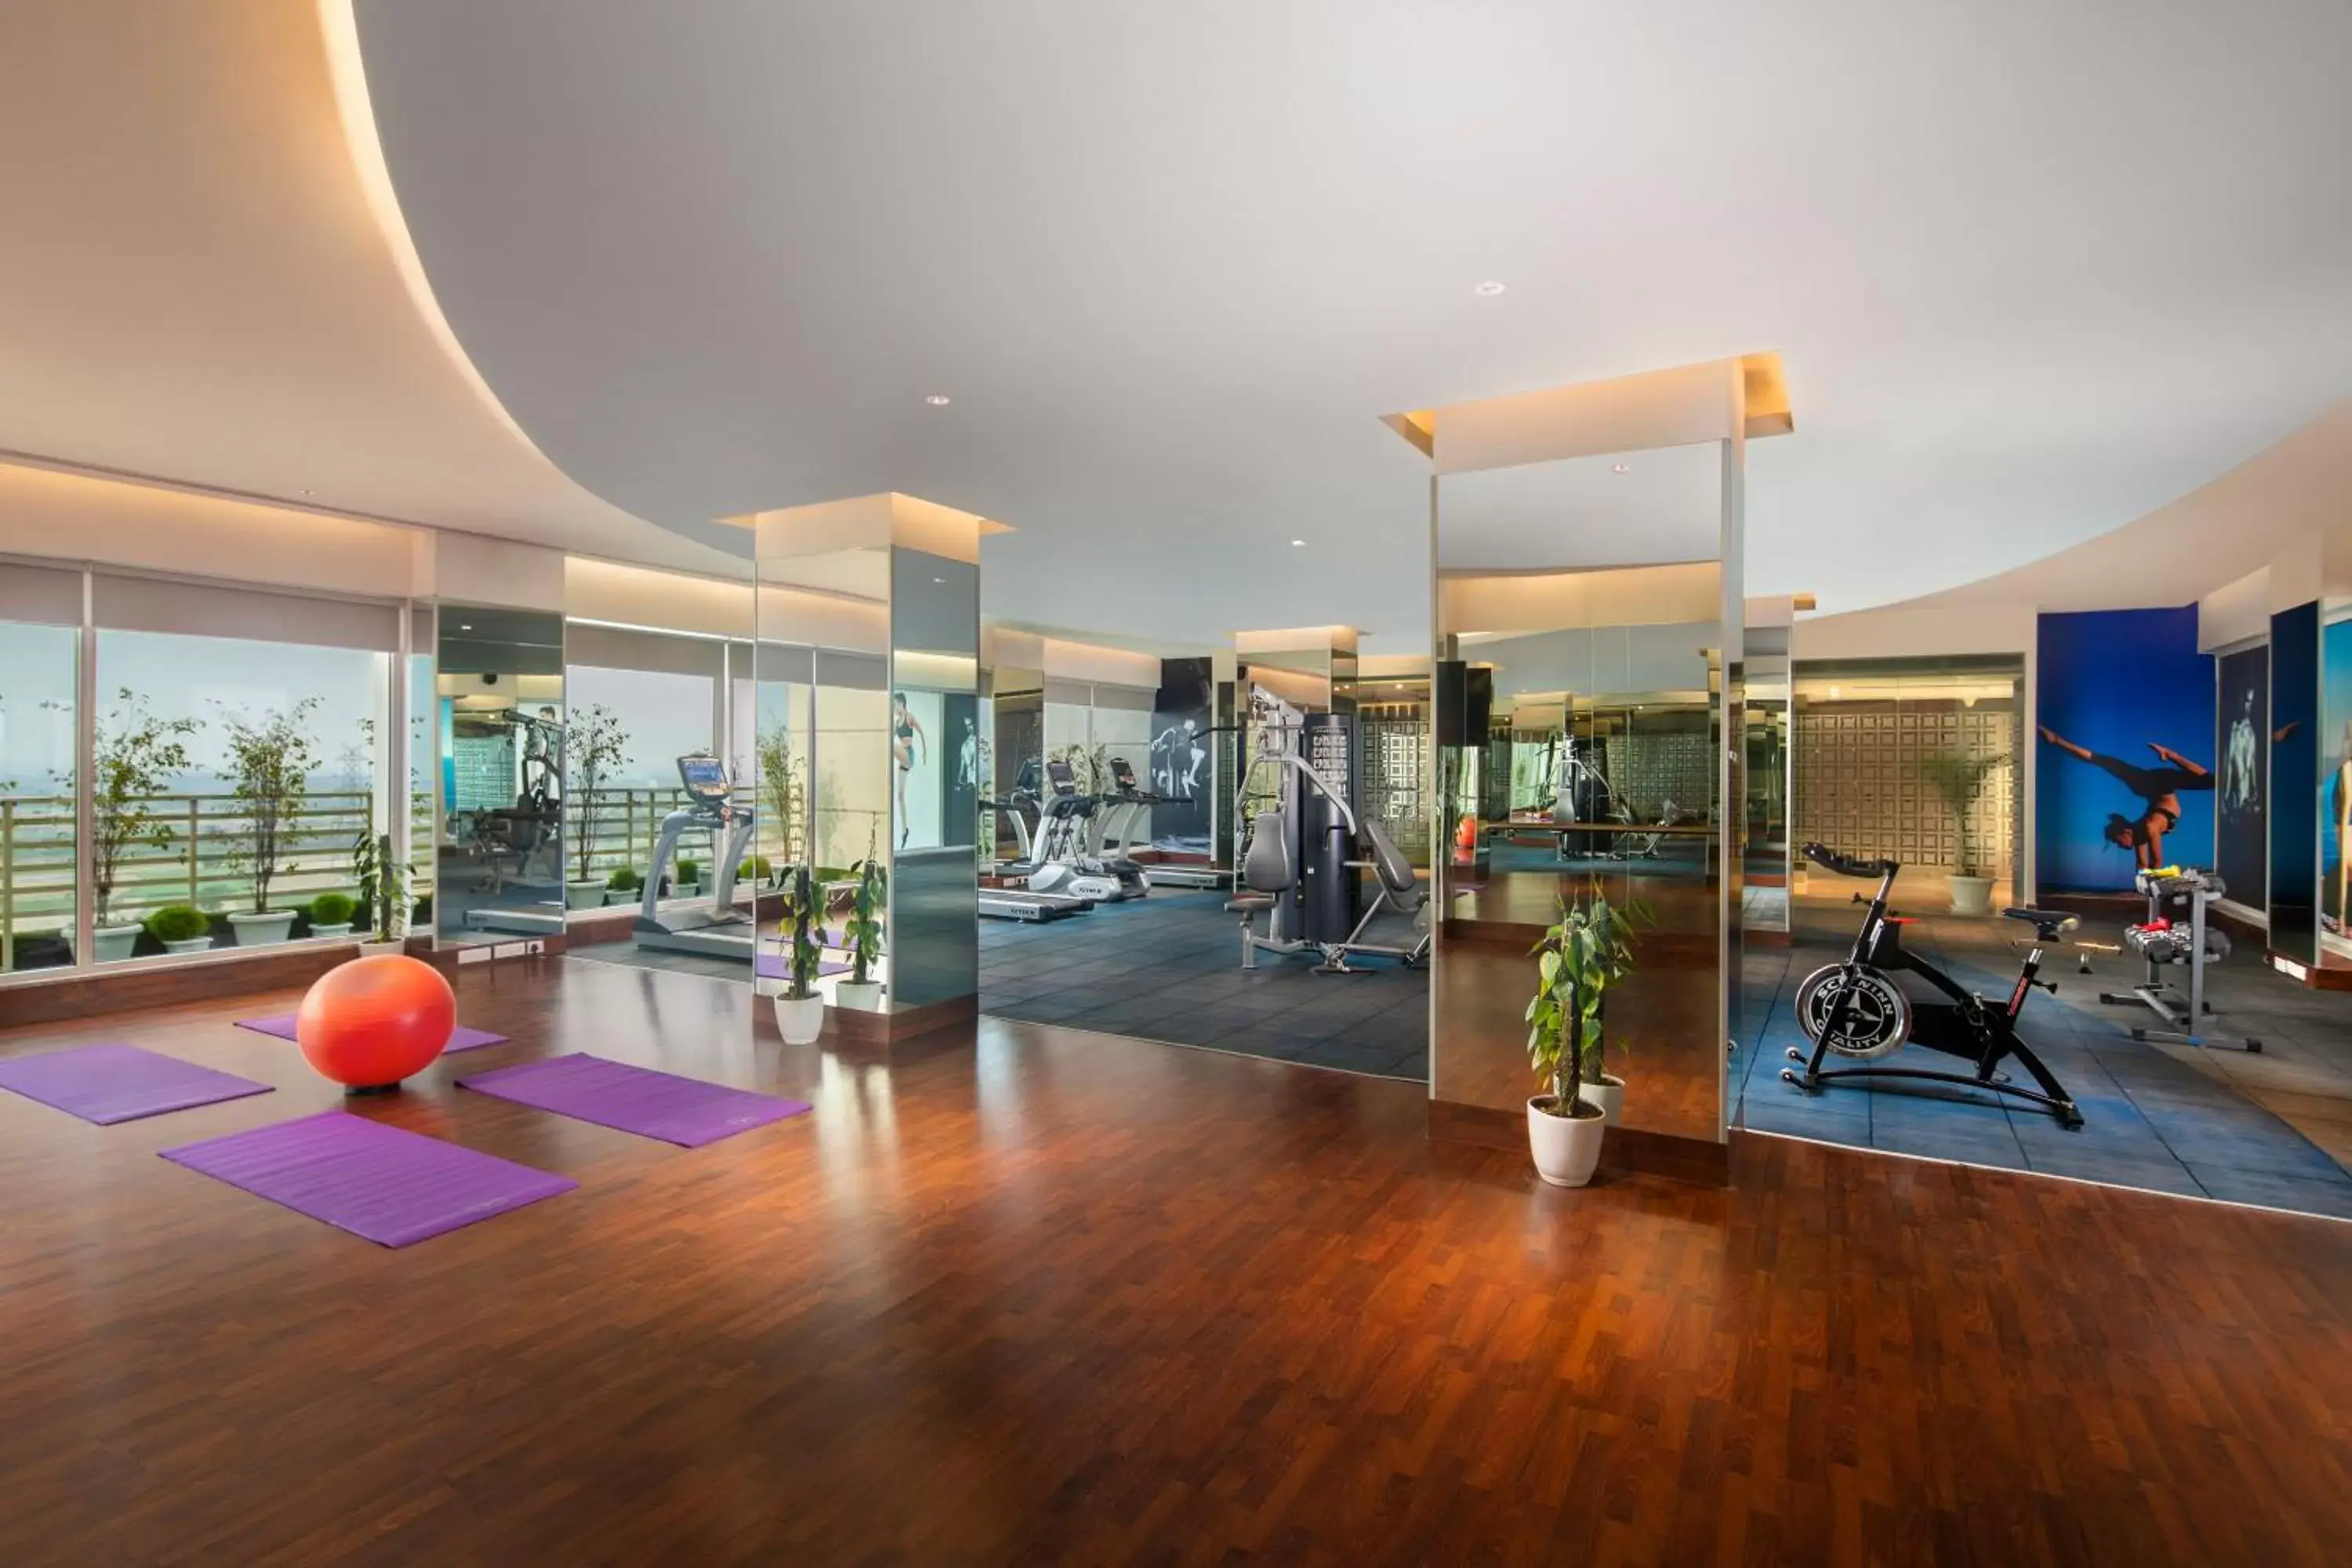 Fitness centre/facilities, Fitness Center/Facilities in Sandal Suites by Lemon Tree Hotels